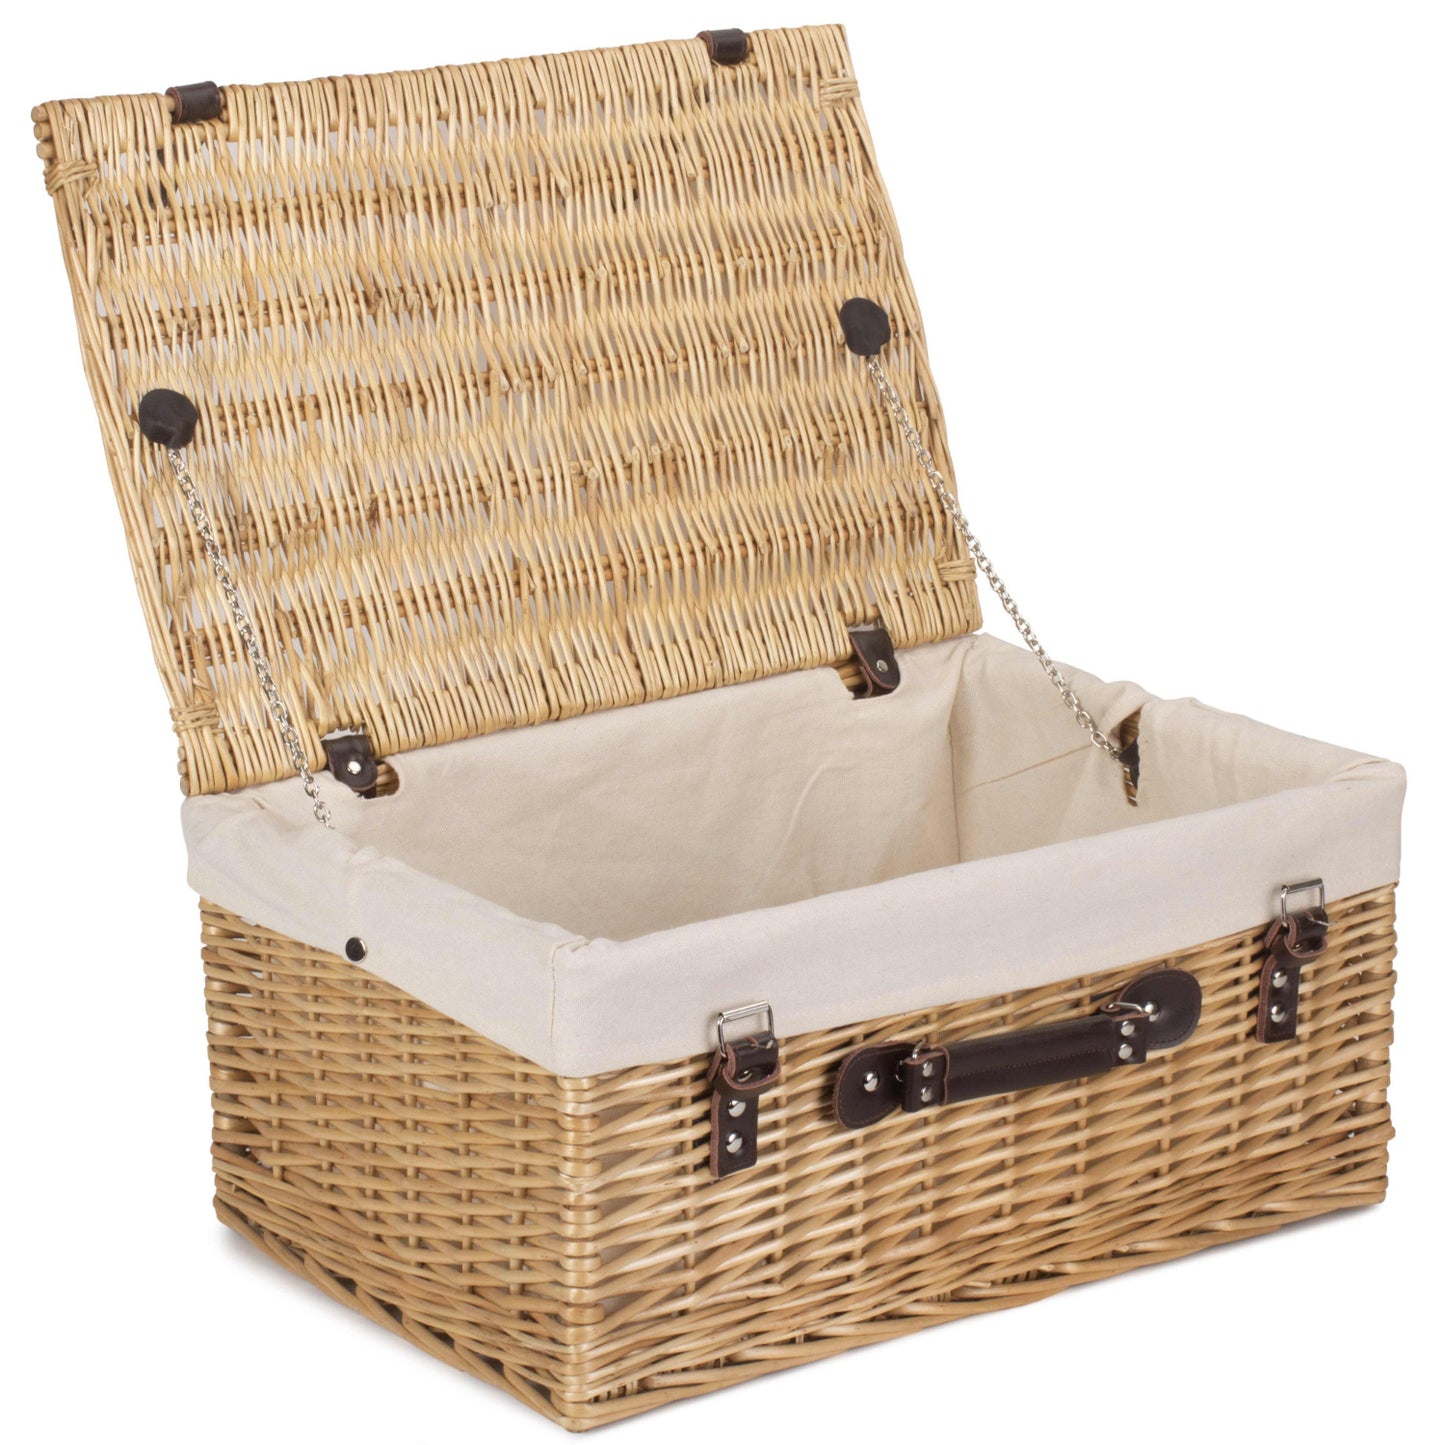 20 Inch Buff Hamper With White Lining